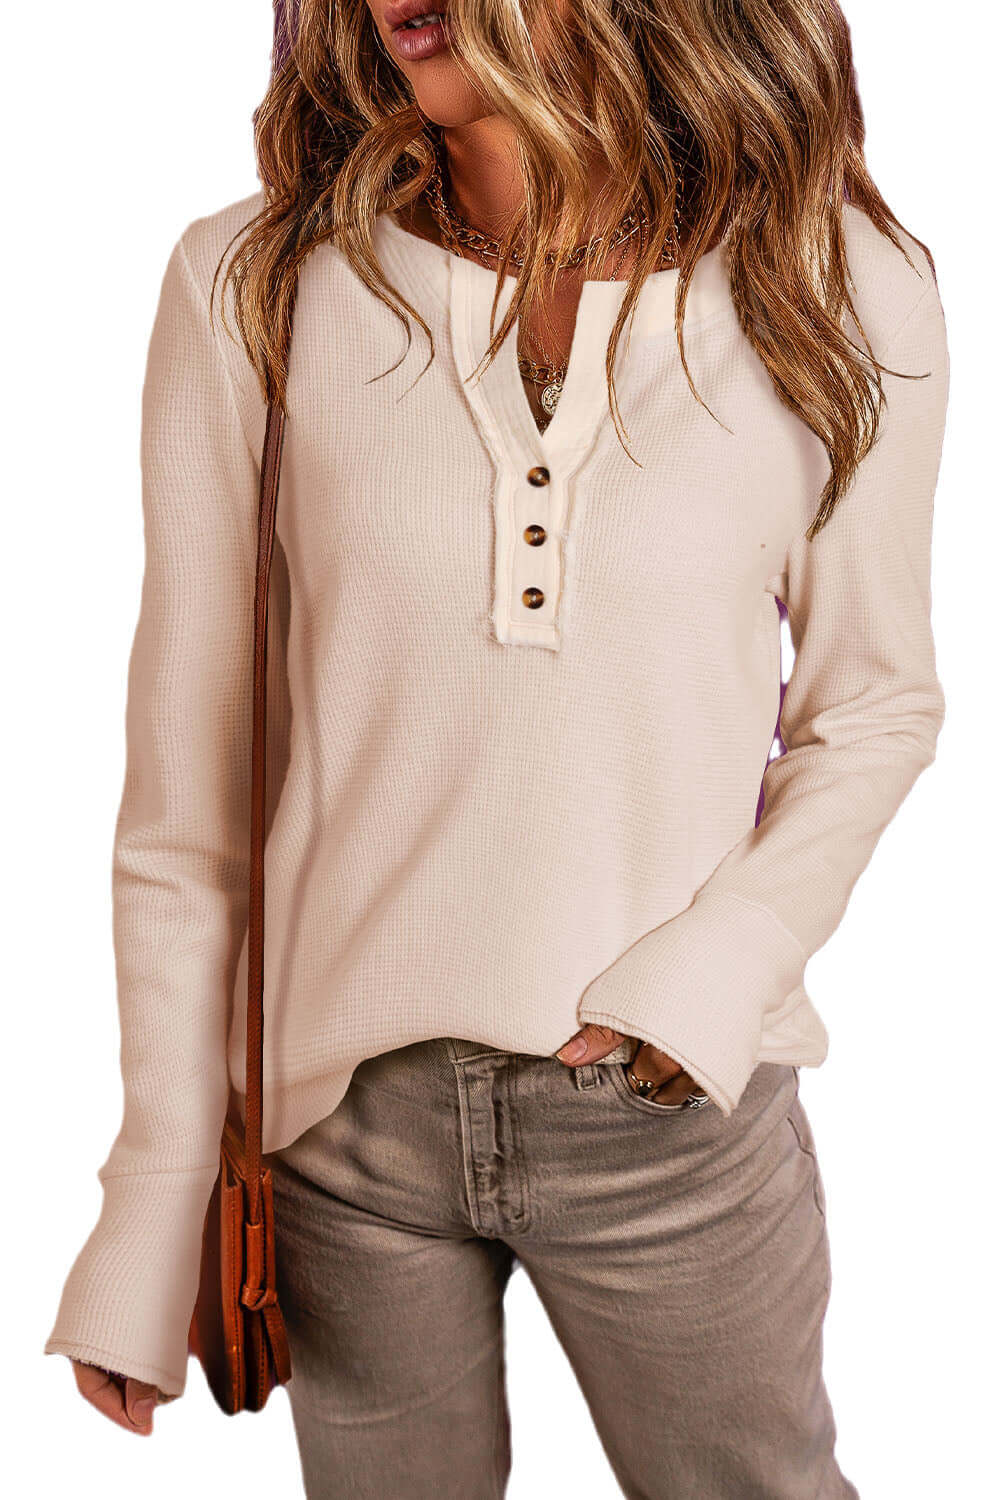 Beige Waffle Knit Textured Henley Top - Dixie Hike & Style